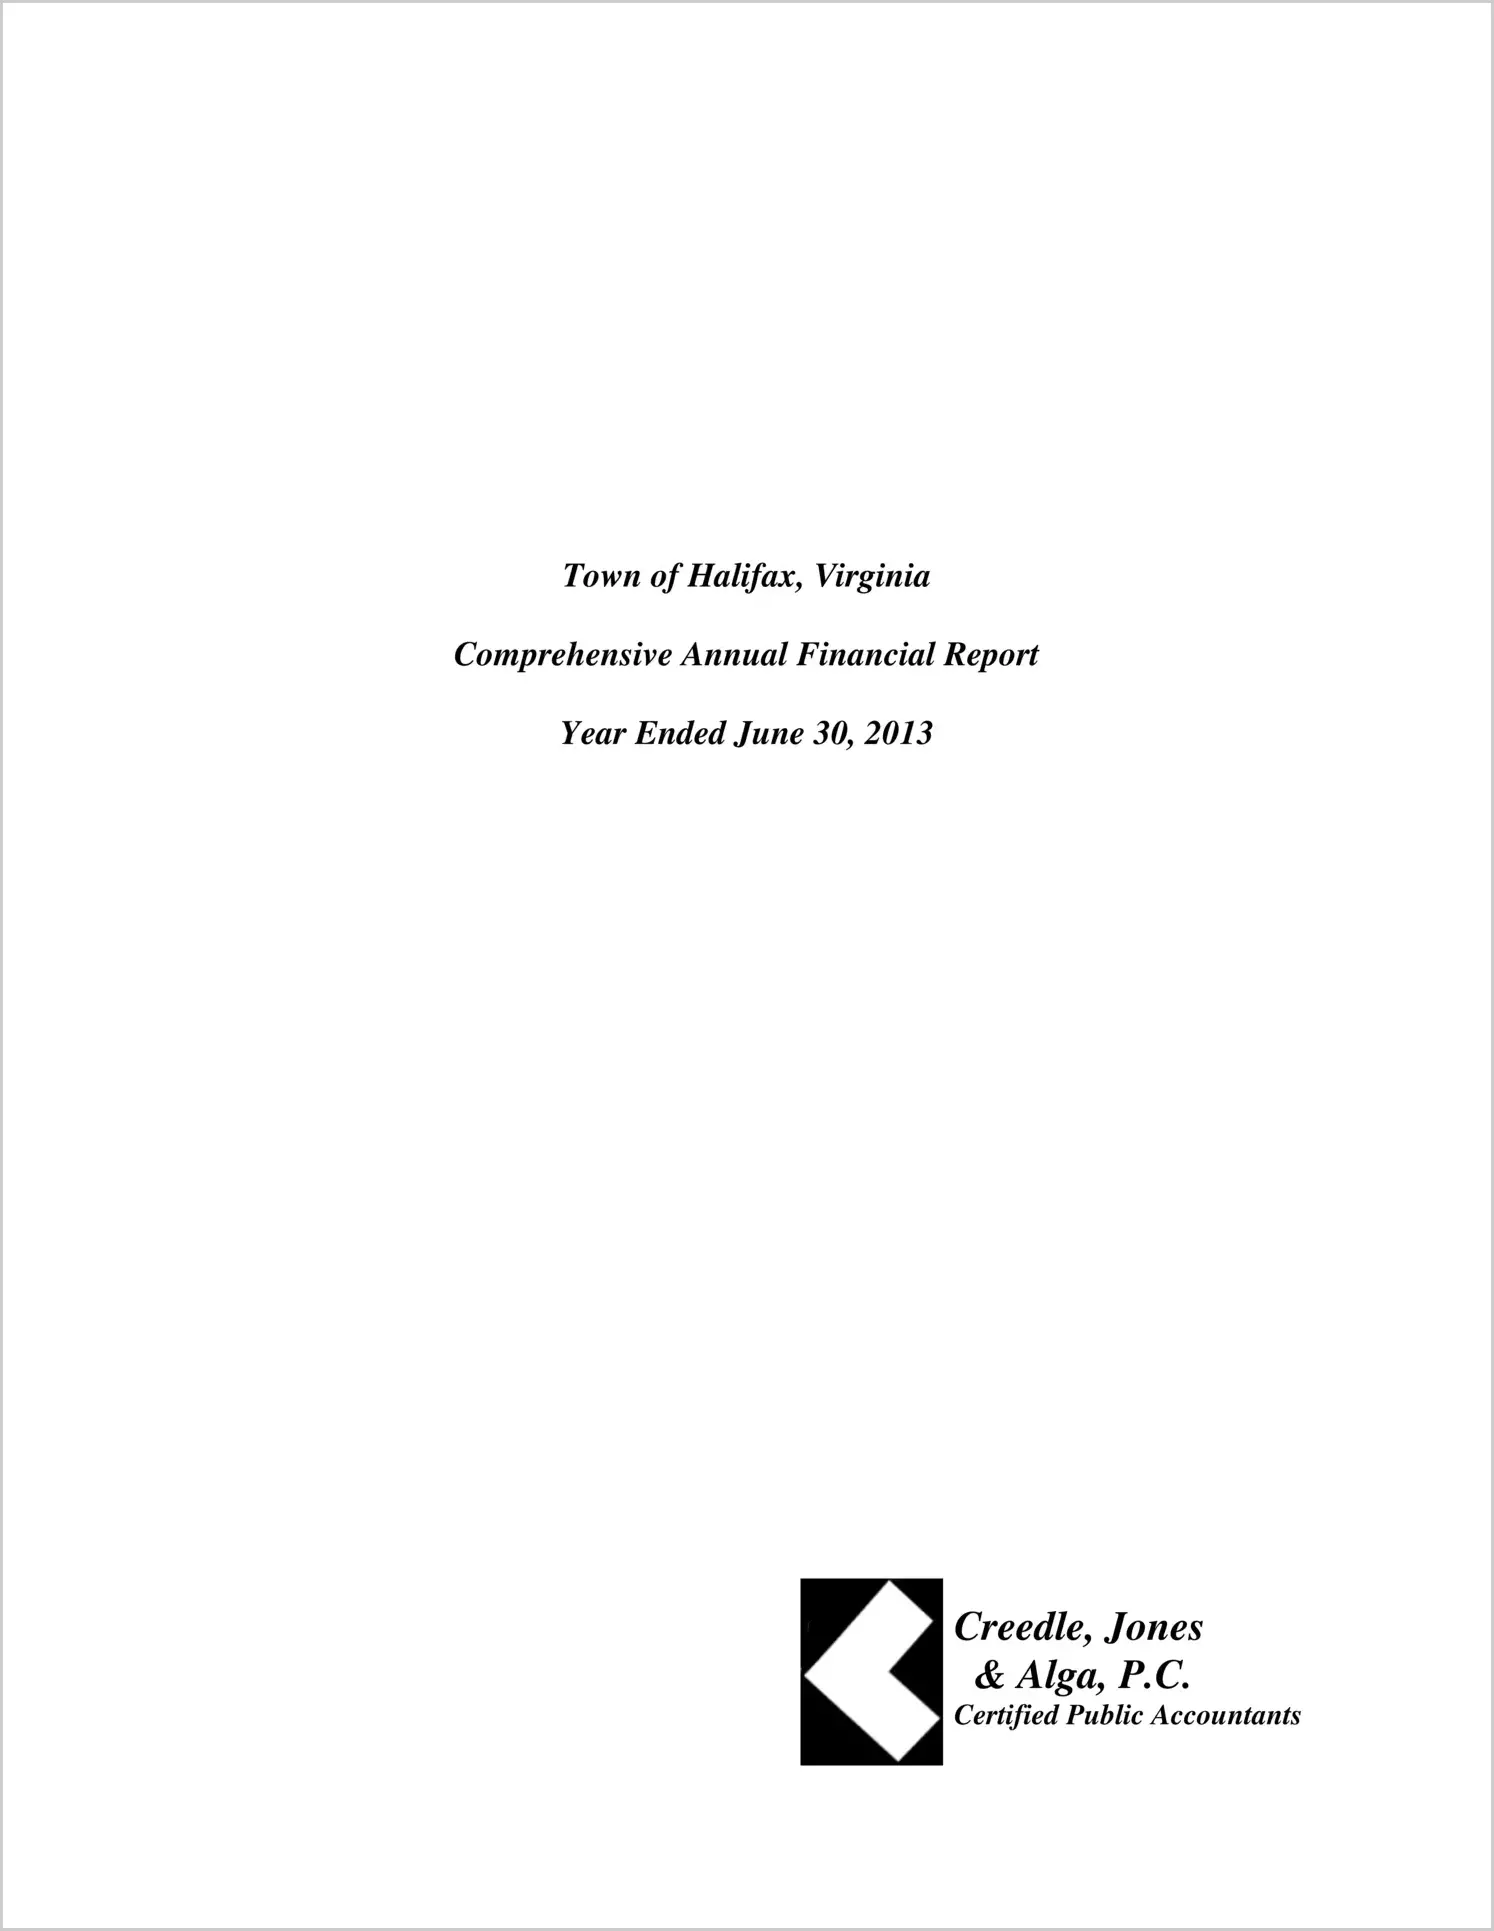 2013 Annual Financial Report for Town of Halifax